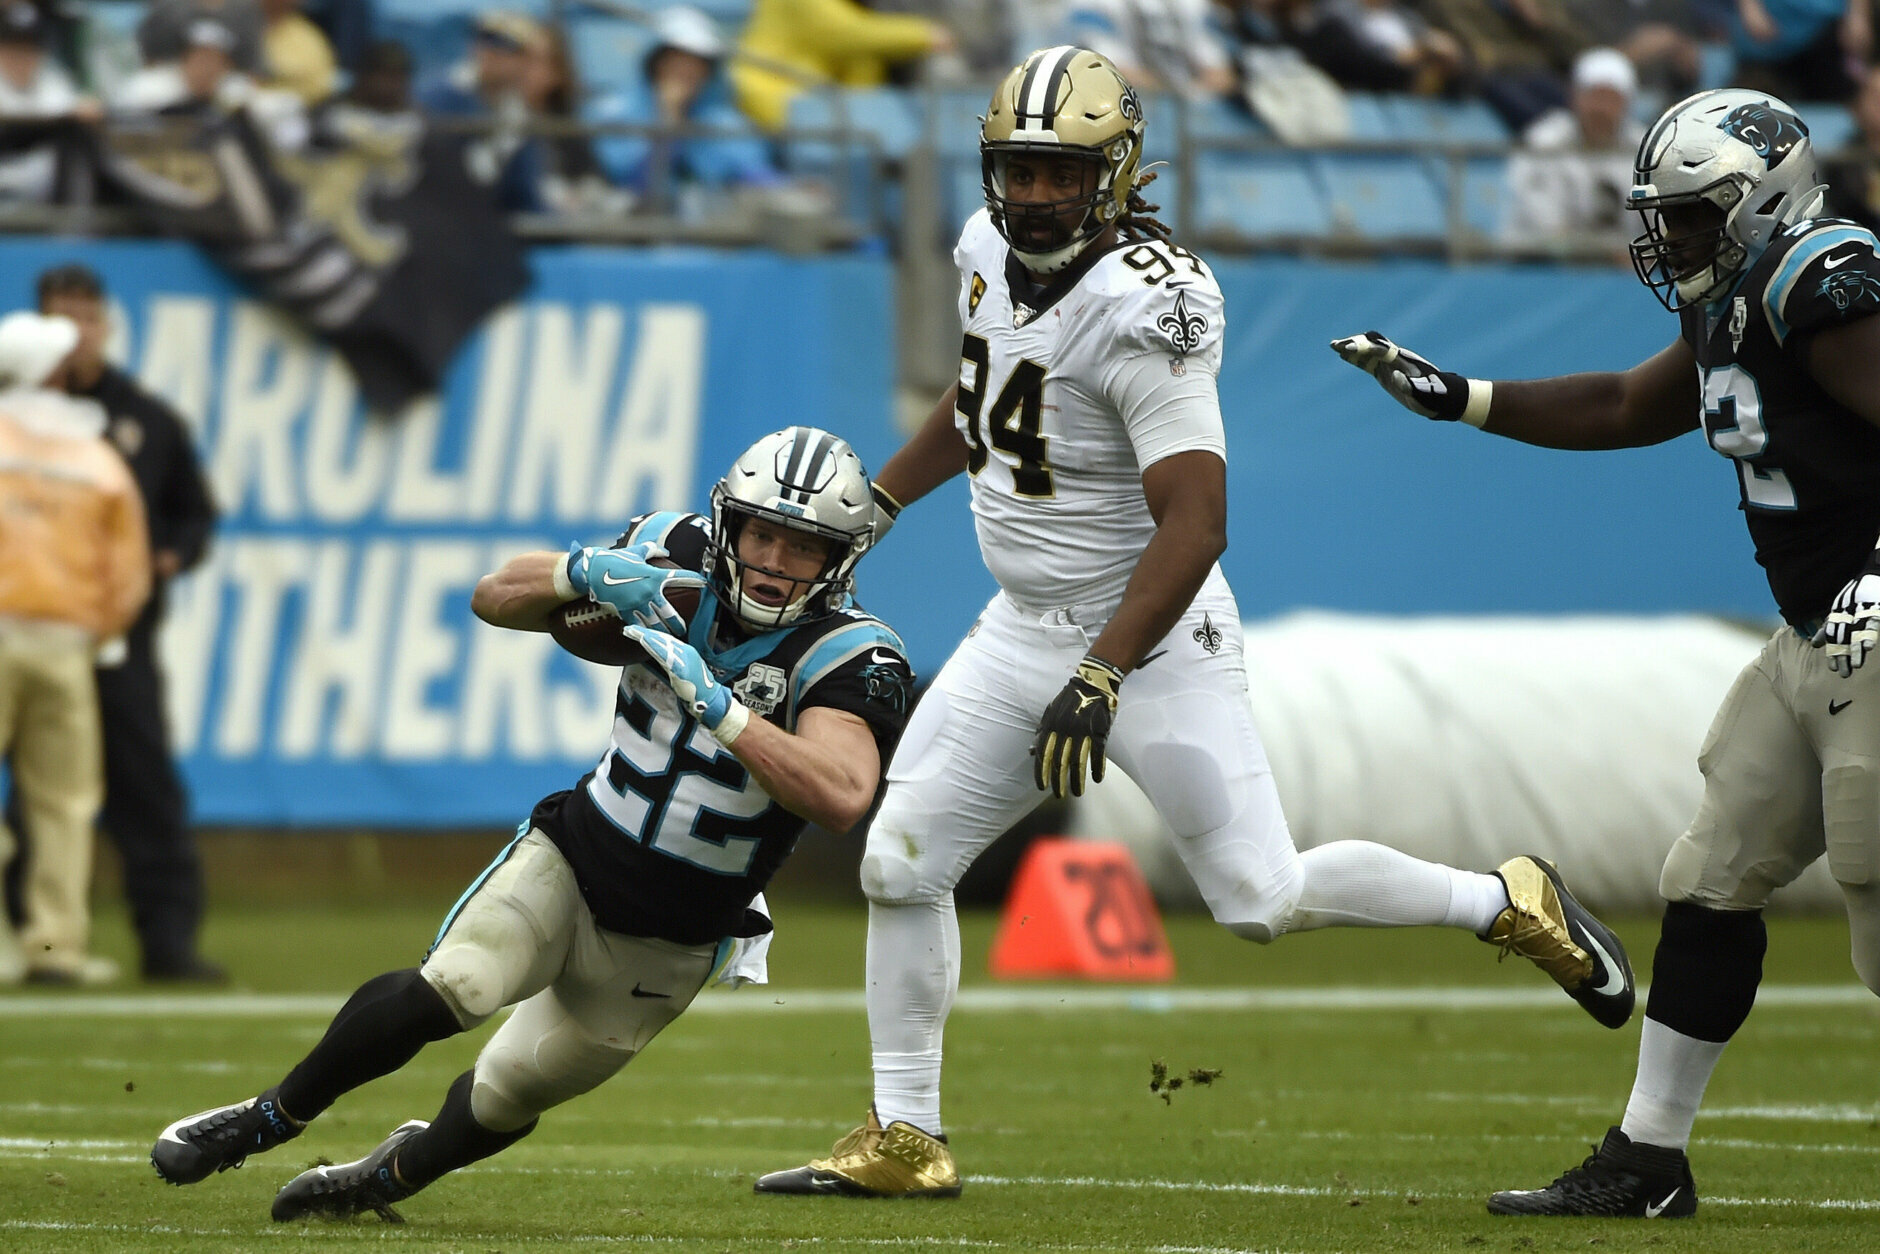 <p><b><i>Saints 42</i></b><br />
<b><i>Panthers 10</i></b></p>
<p>Carolina closes out its season with eight straight losses, but whomever lands the head coaching job will be thrilled to have Christian McCaffrey, the third player in NFL history and first in 20 years to notch 1,000 rushing yards and 1,000 receiving yards in the same season. If the Panthers can find their long-term solution at QB — or even a decent one — they could rebound quickly in a questionable division.</p>
<p>Of course, New Orleans presently rules that division, and though homefield advantage won&#8217;t happen for them, the Saints look like a team capable of going on the road and doing some damage. This is the best team without a bye week.</p>
